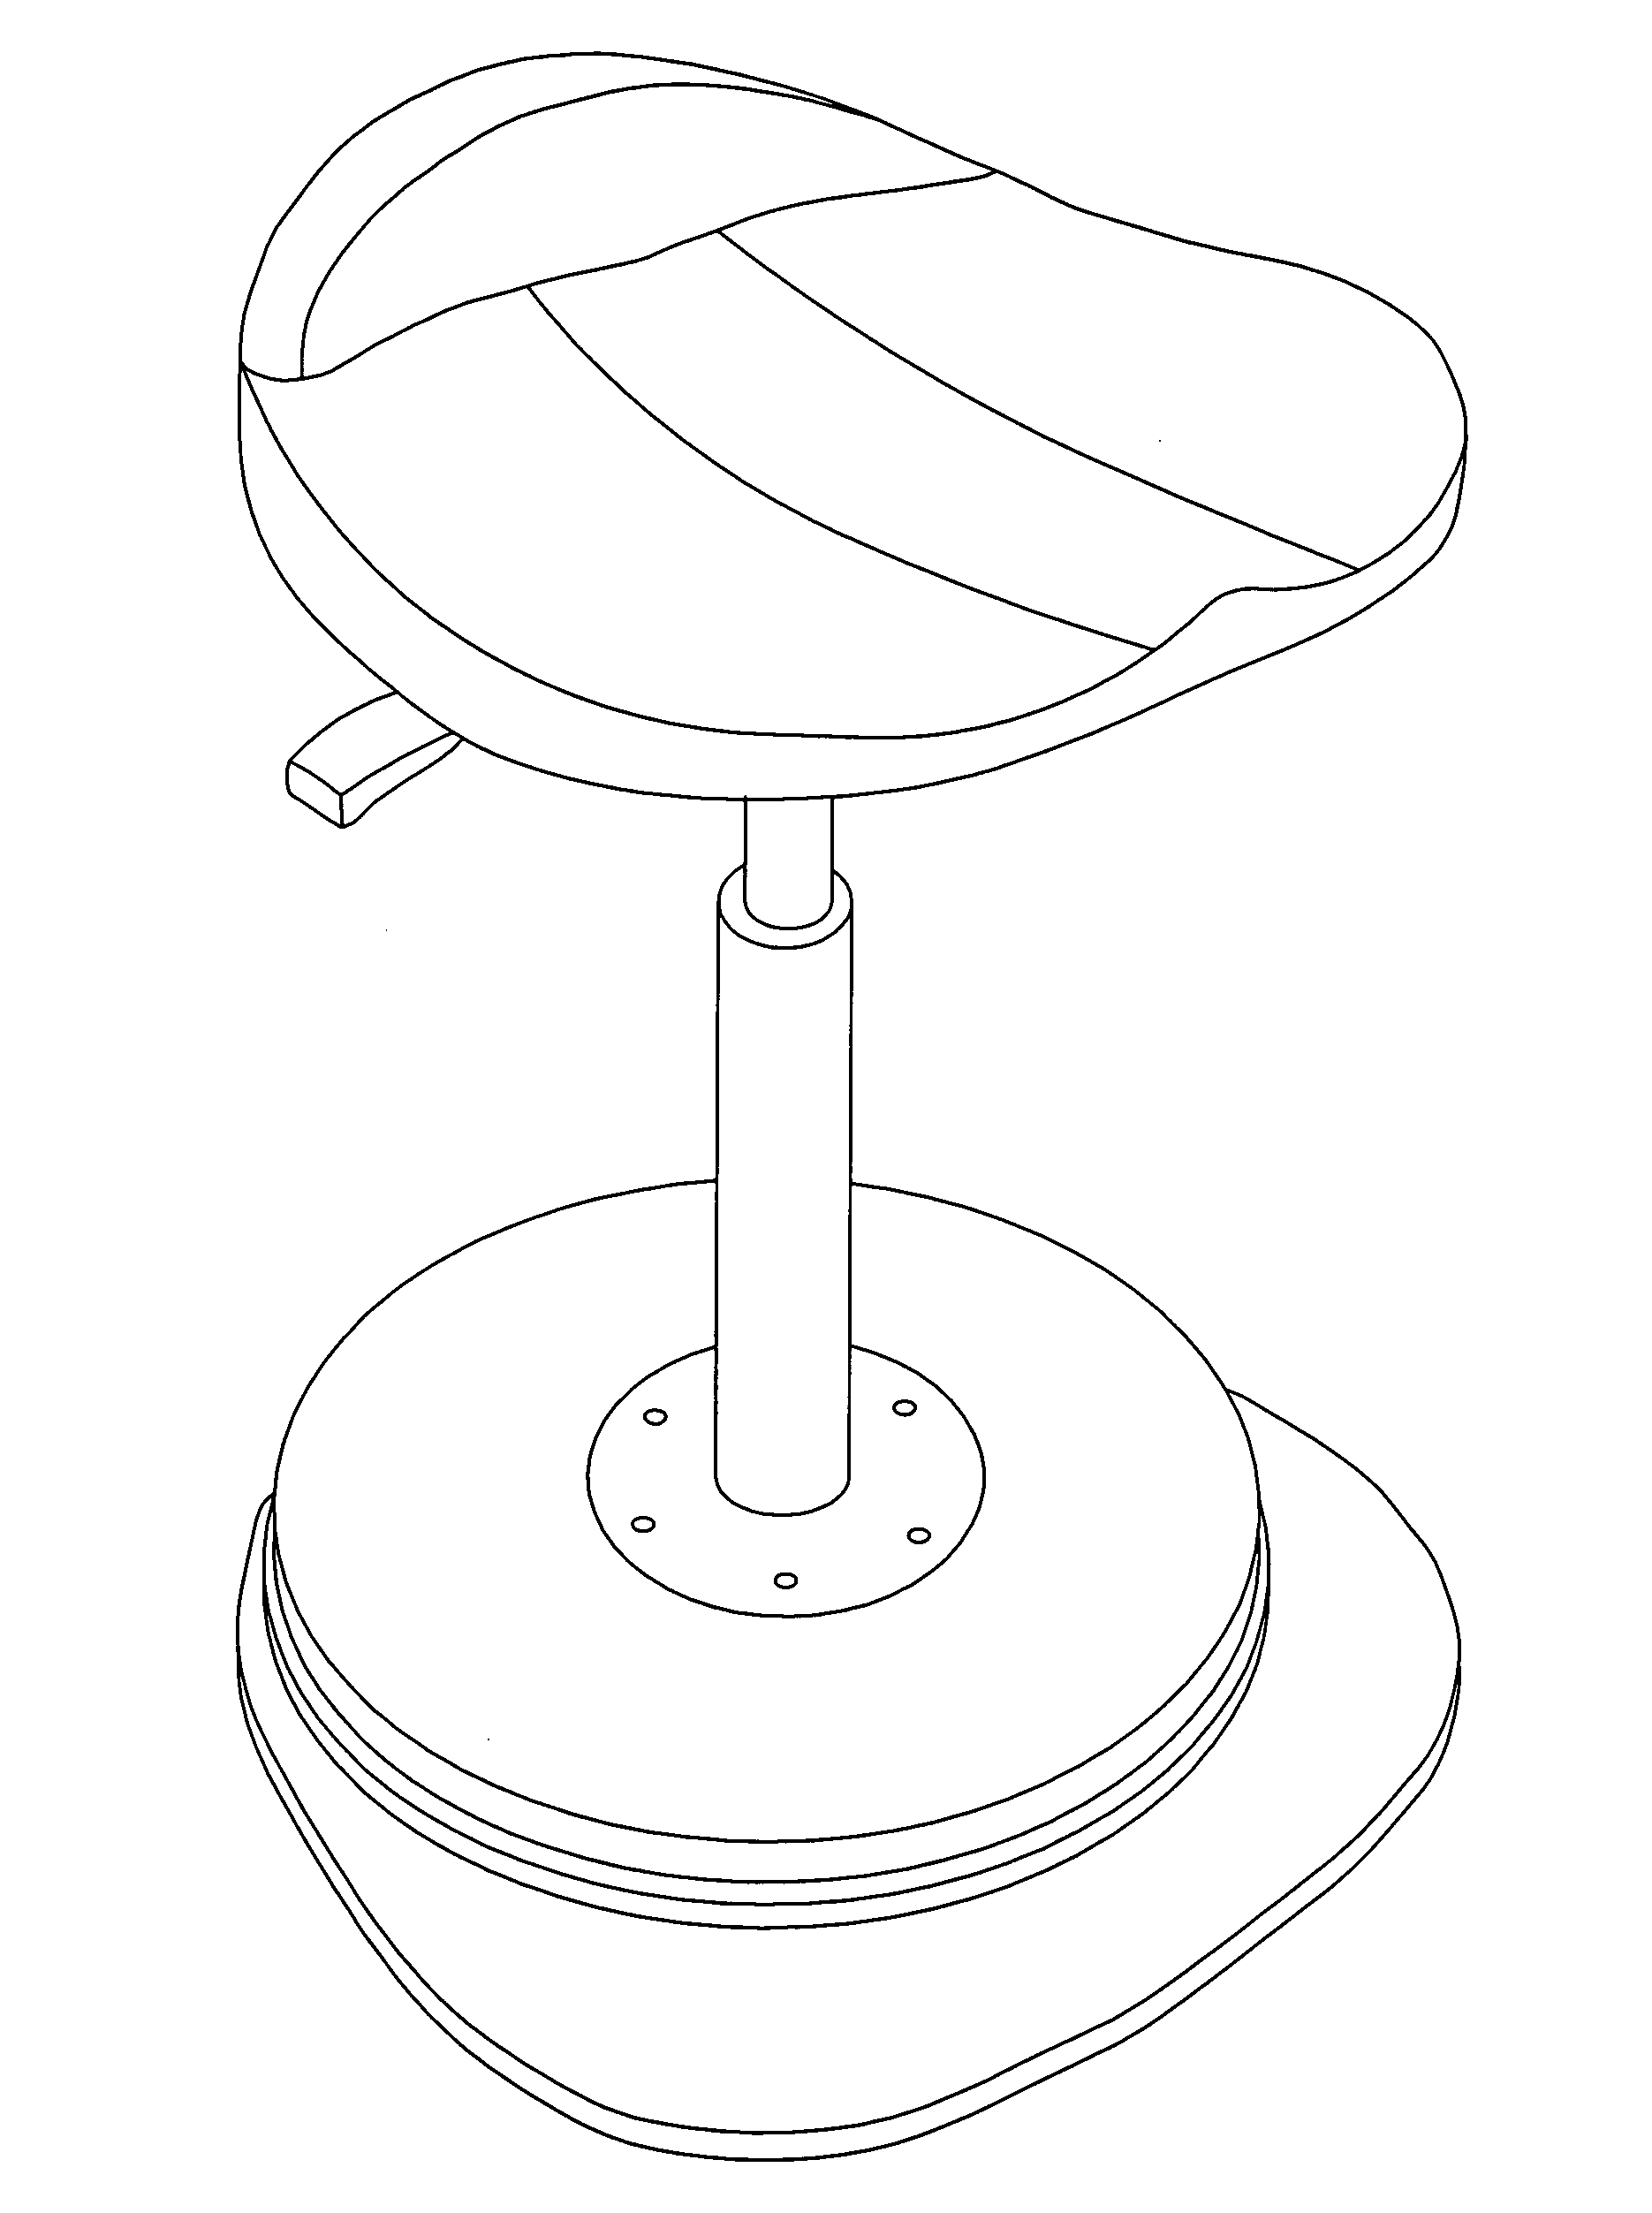 Seat with a non-vertical central supporting column and tri-planar moveable base